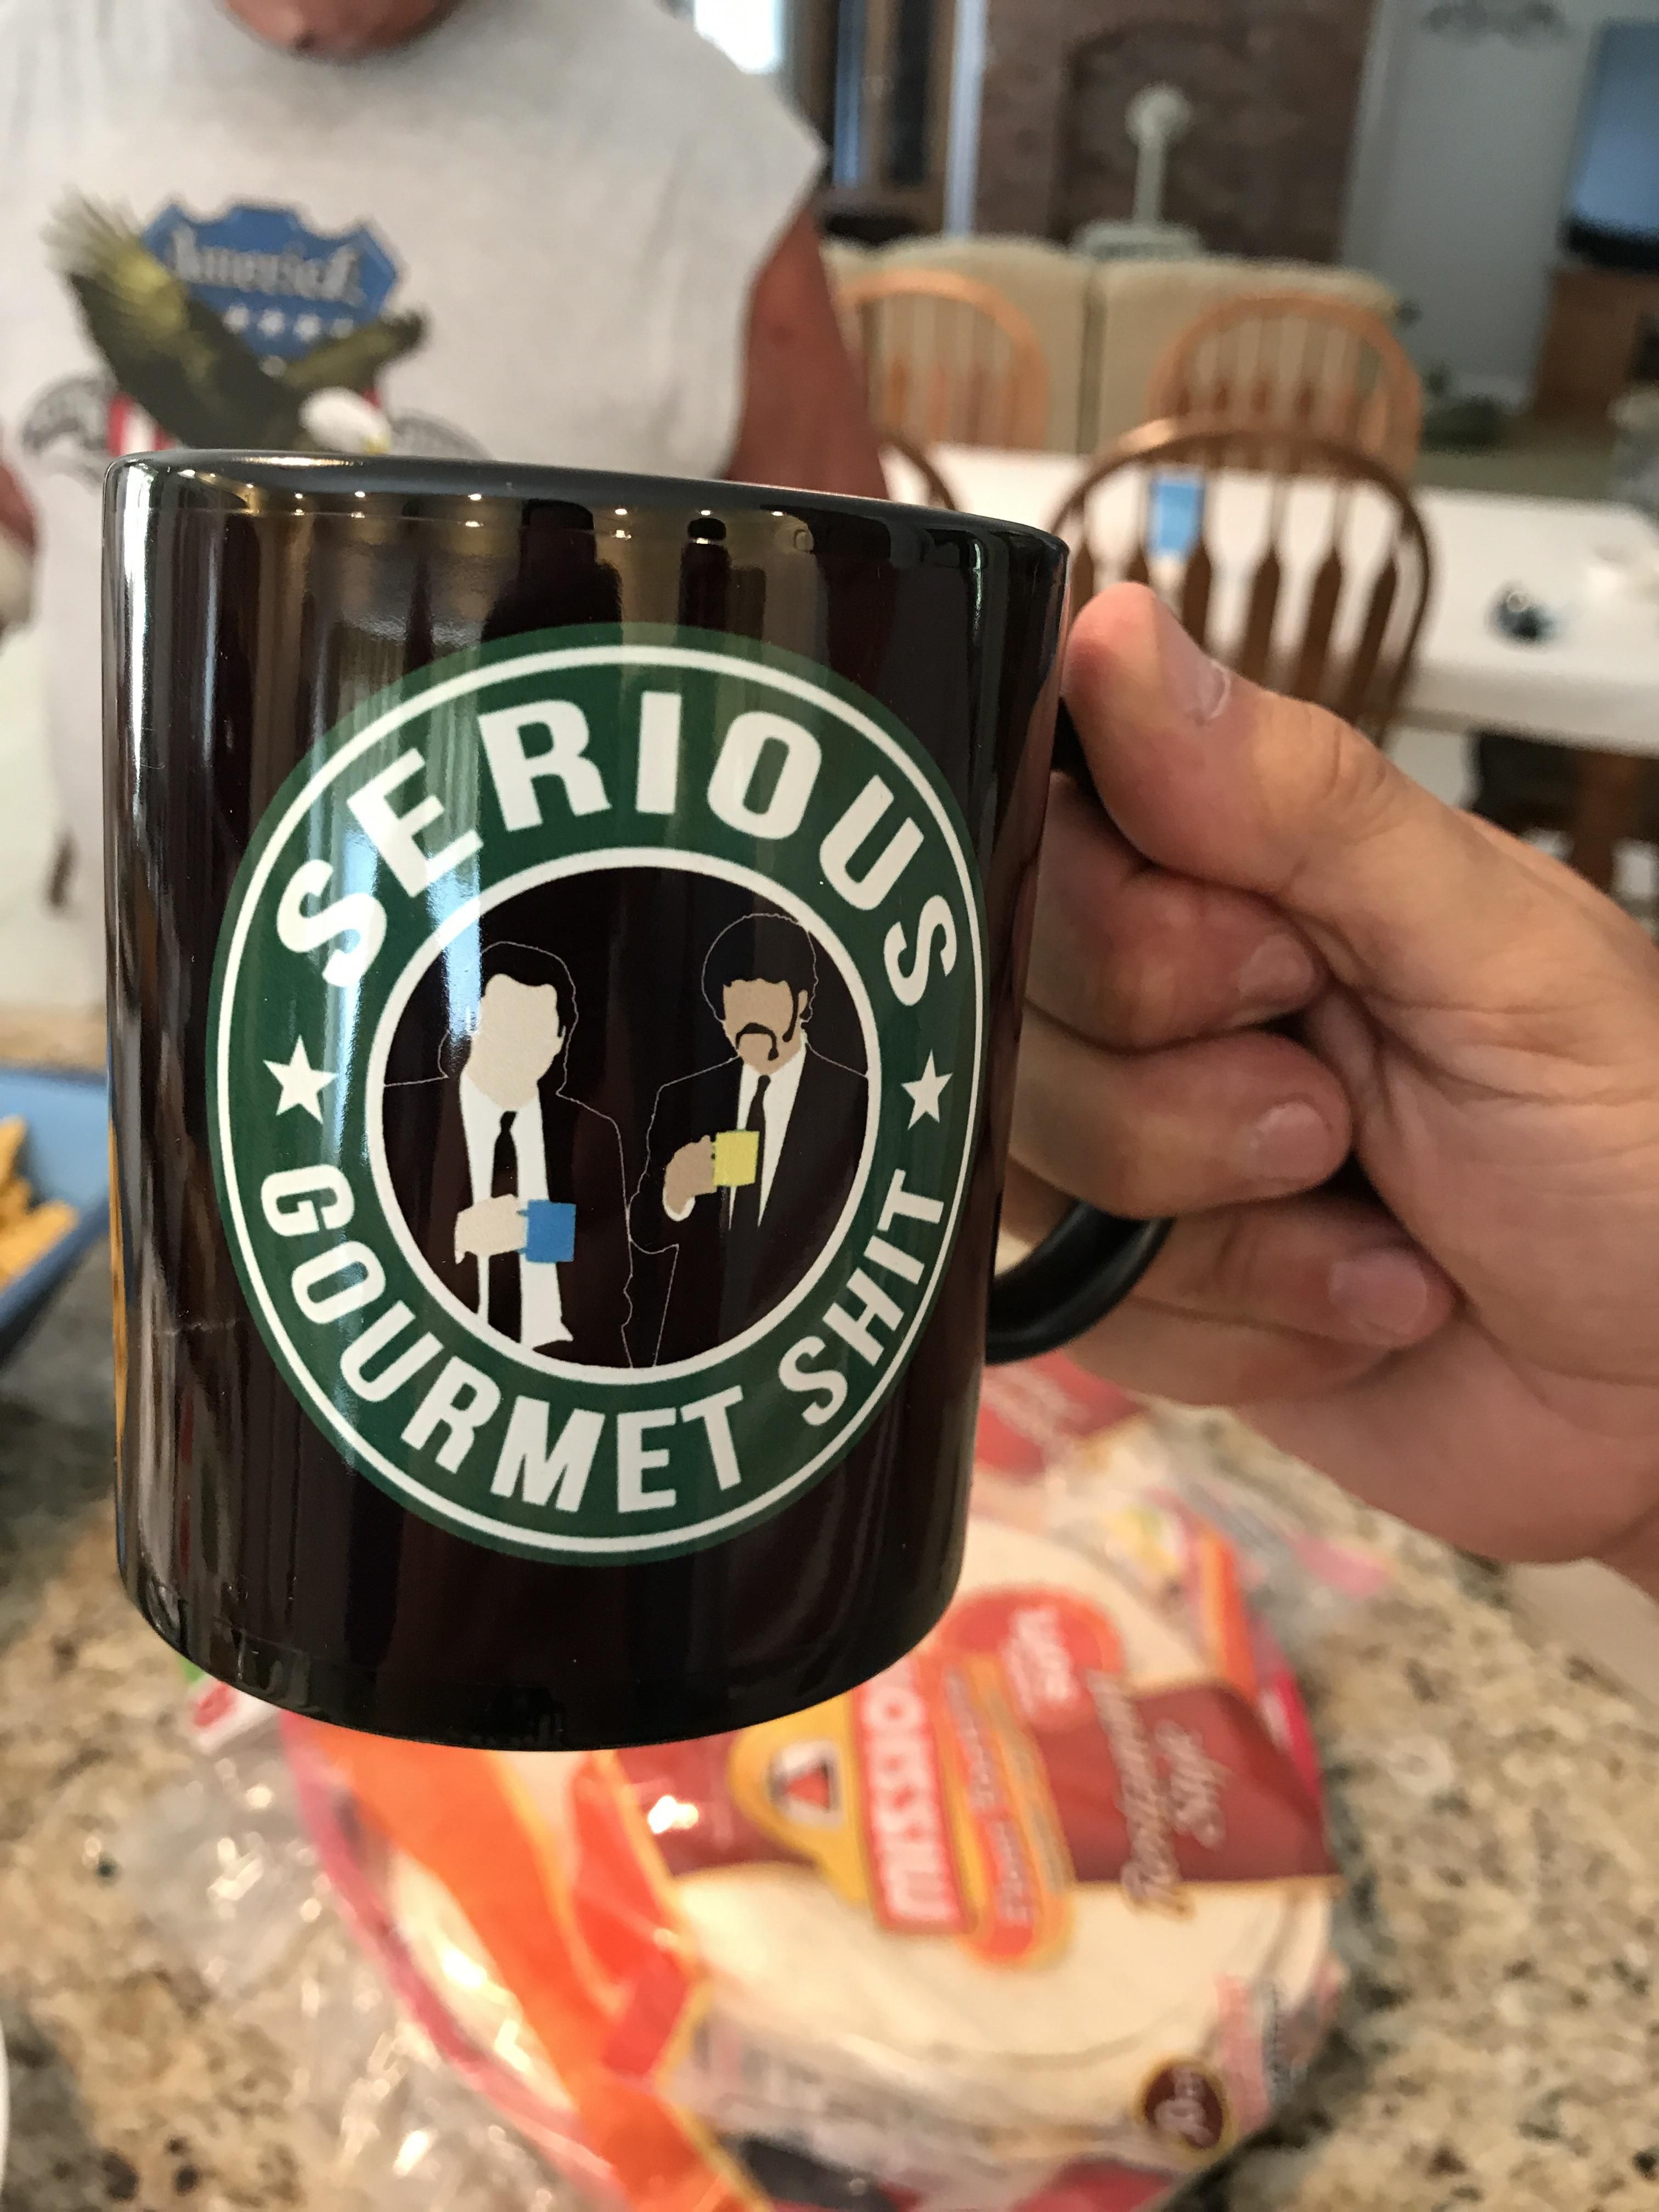 A friend gifted this coffee mug to my dad